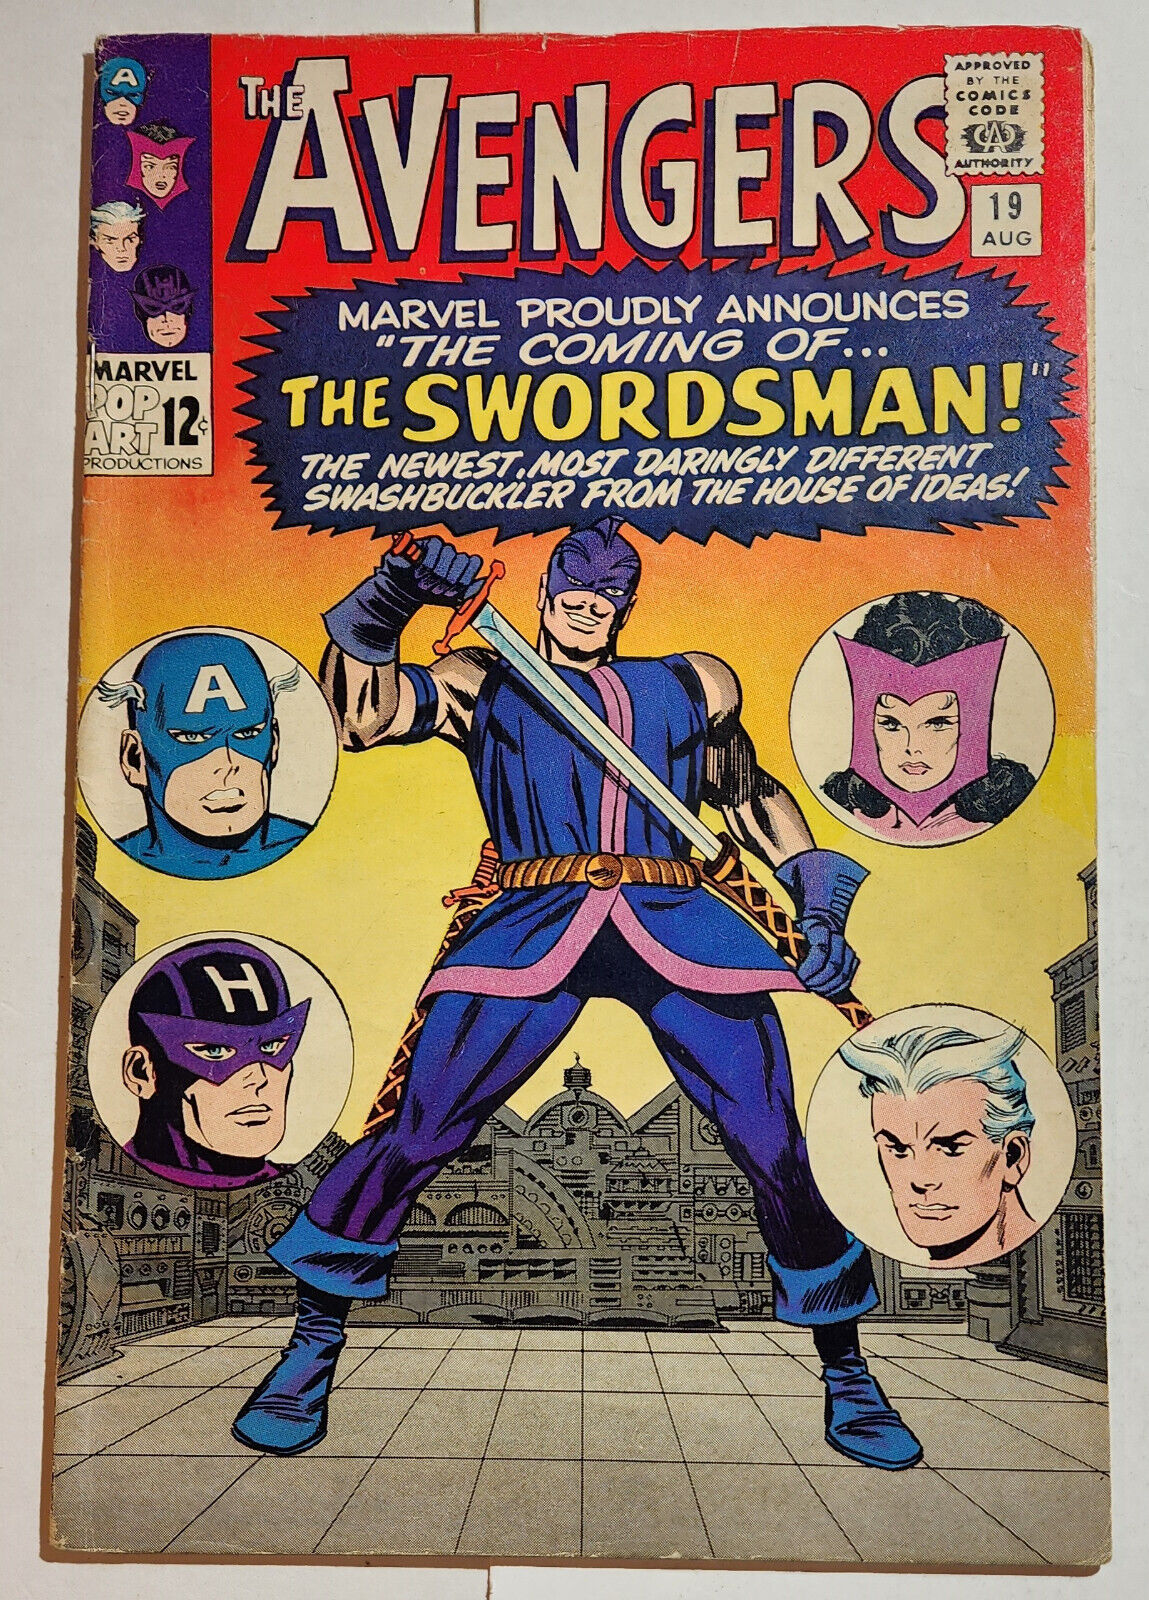 AVENGERS #19 Marvel 1965 by Stan Lee and Don Heck, 1st appearance SWORDSMAN.